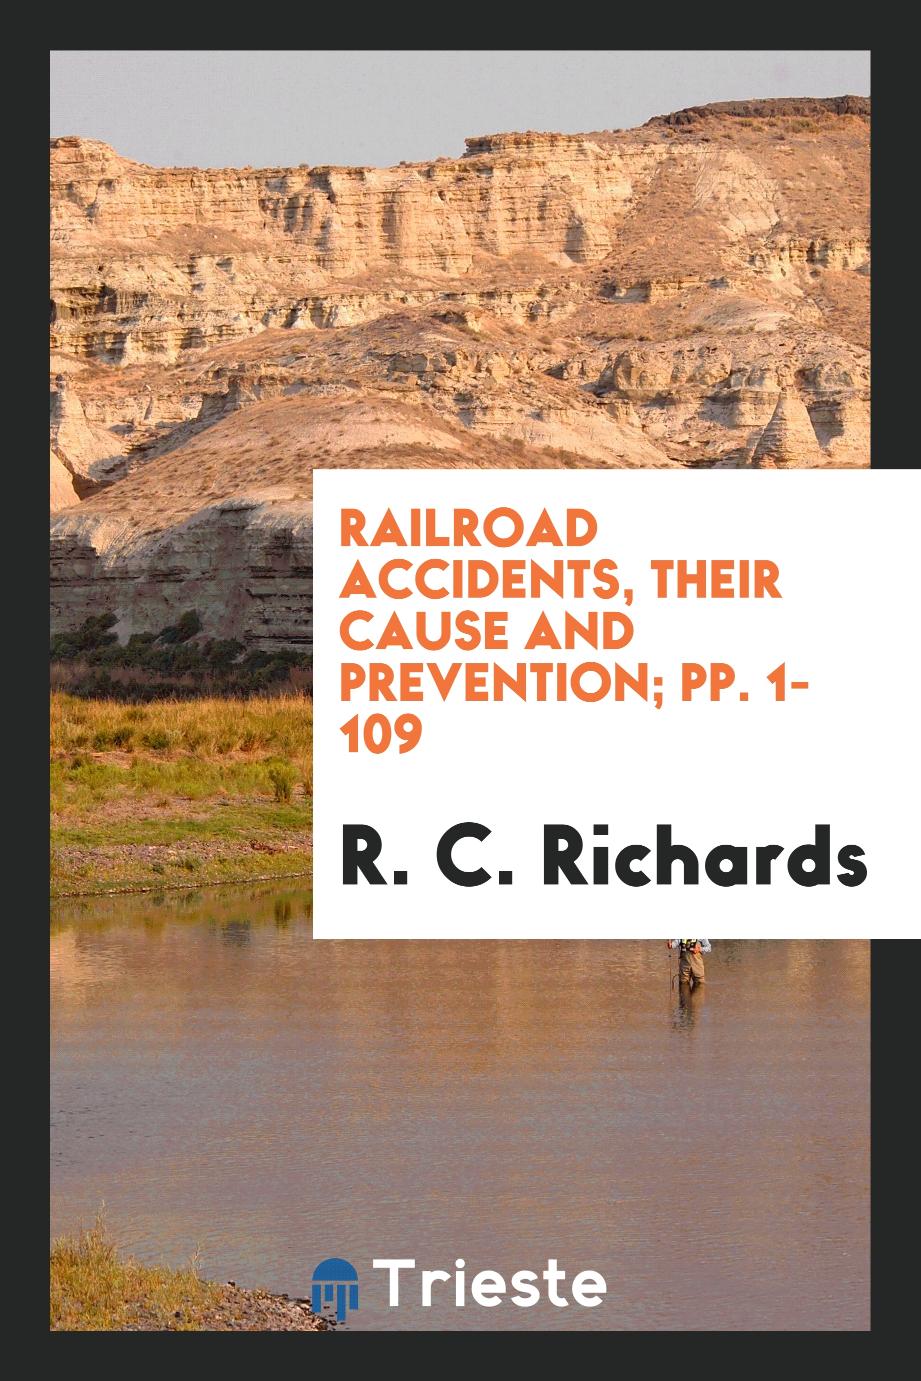 Railroad Accidents, Their Cause and Prevention; pp. 1-109